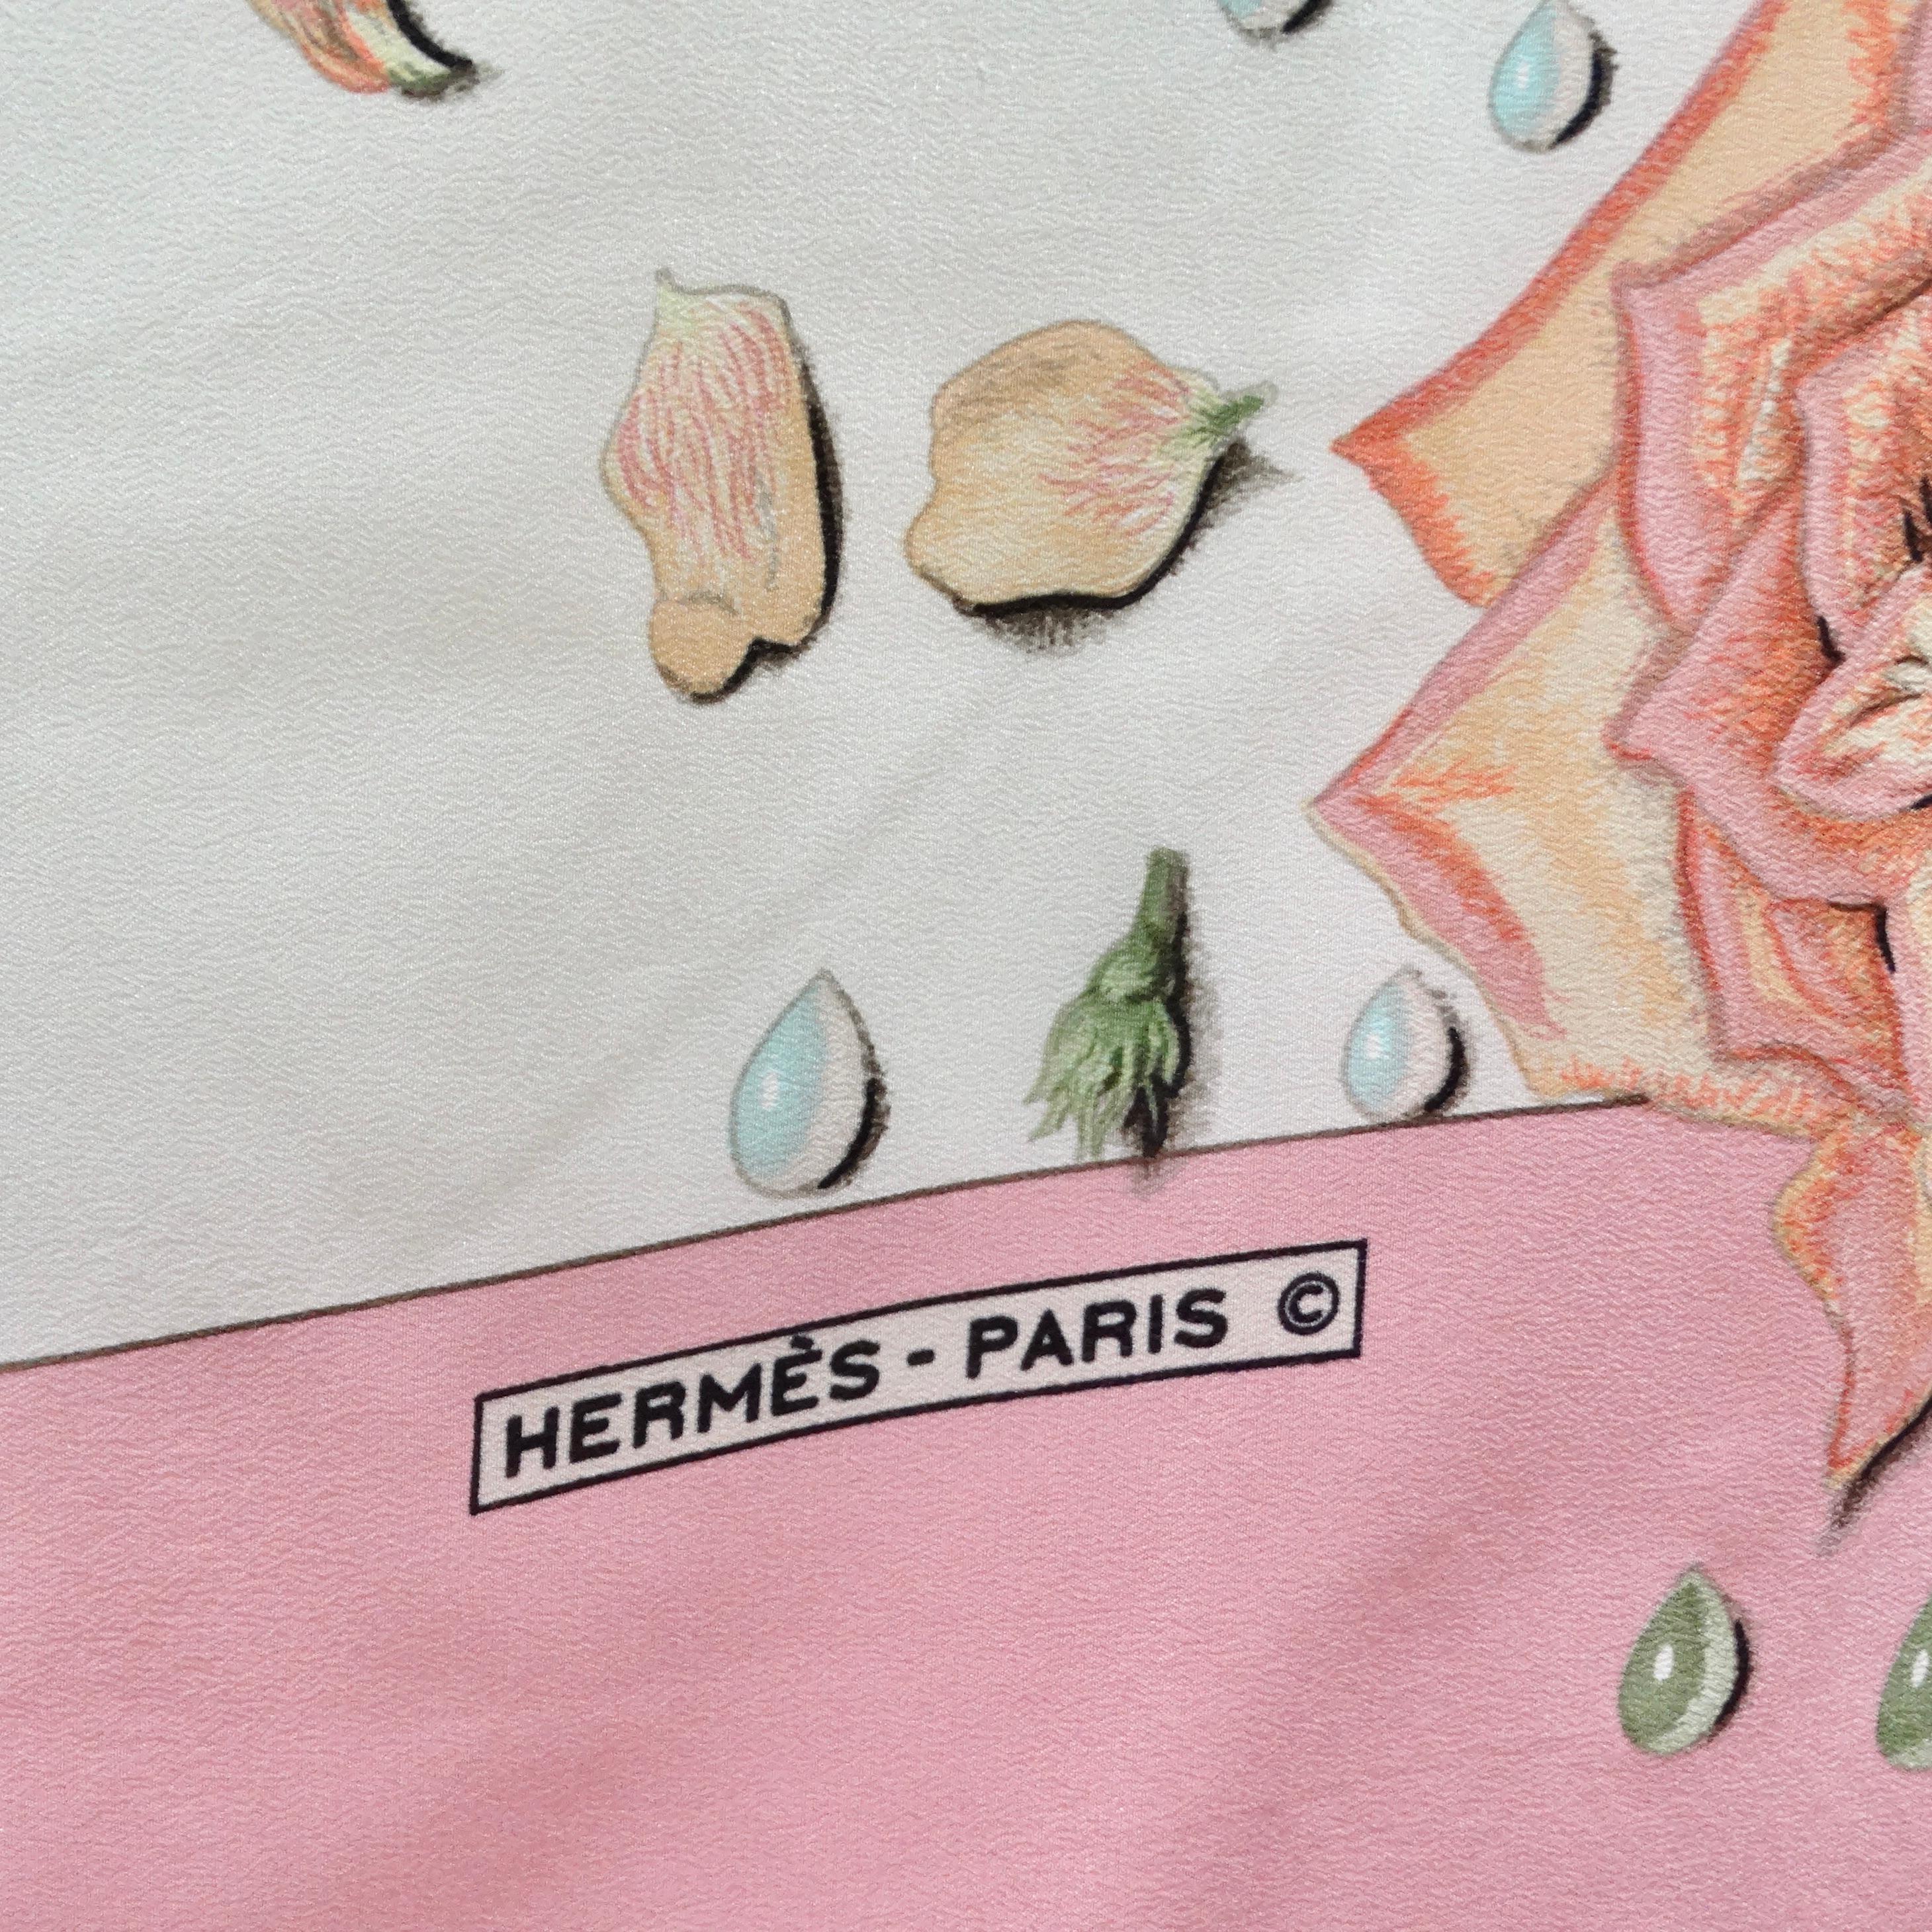 Introducing the Hermes 1960s La Rosee Silk Shawl, a truly exquisite and rare piece that epitomizes the timeless elegance and luxury of Hermes. Crafted from the finest silk, this shawl features the iconic 'La Rosee' floral print, depicting various